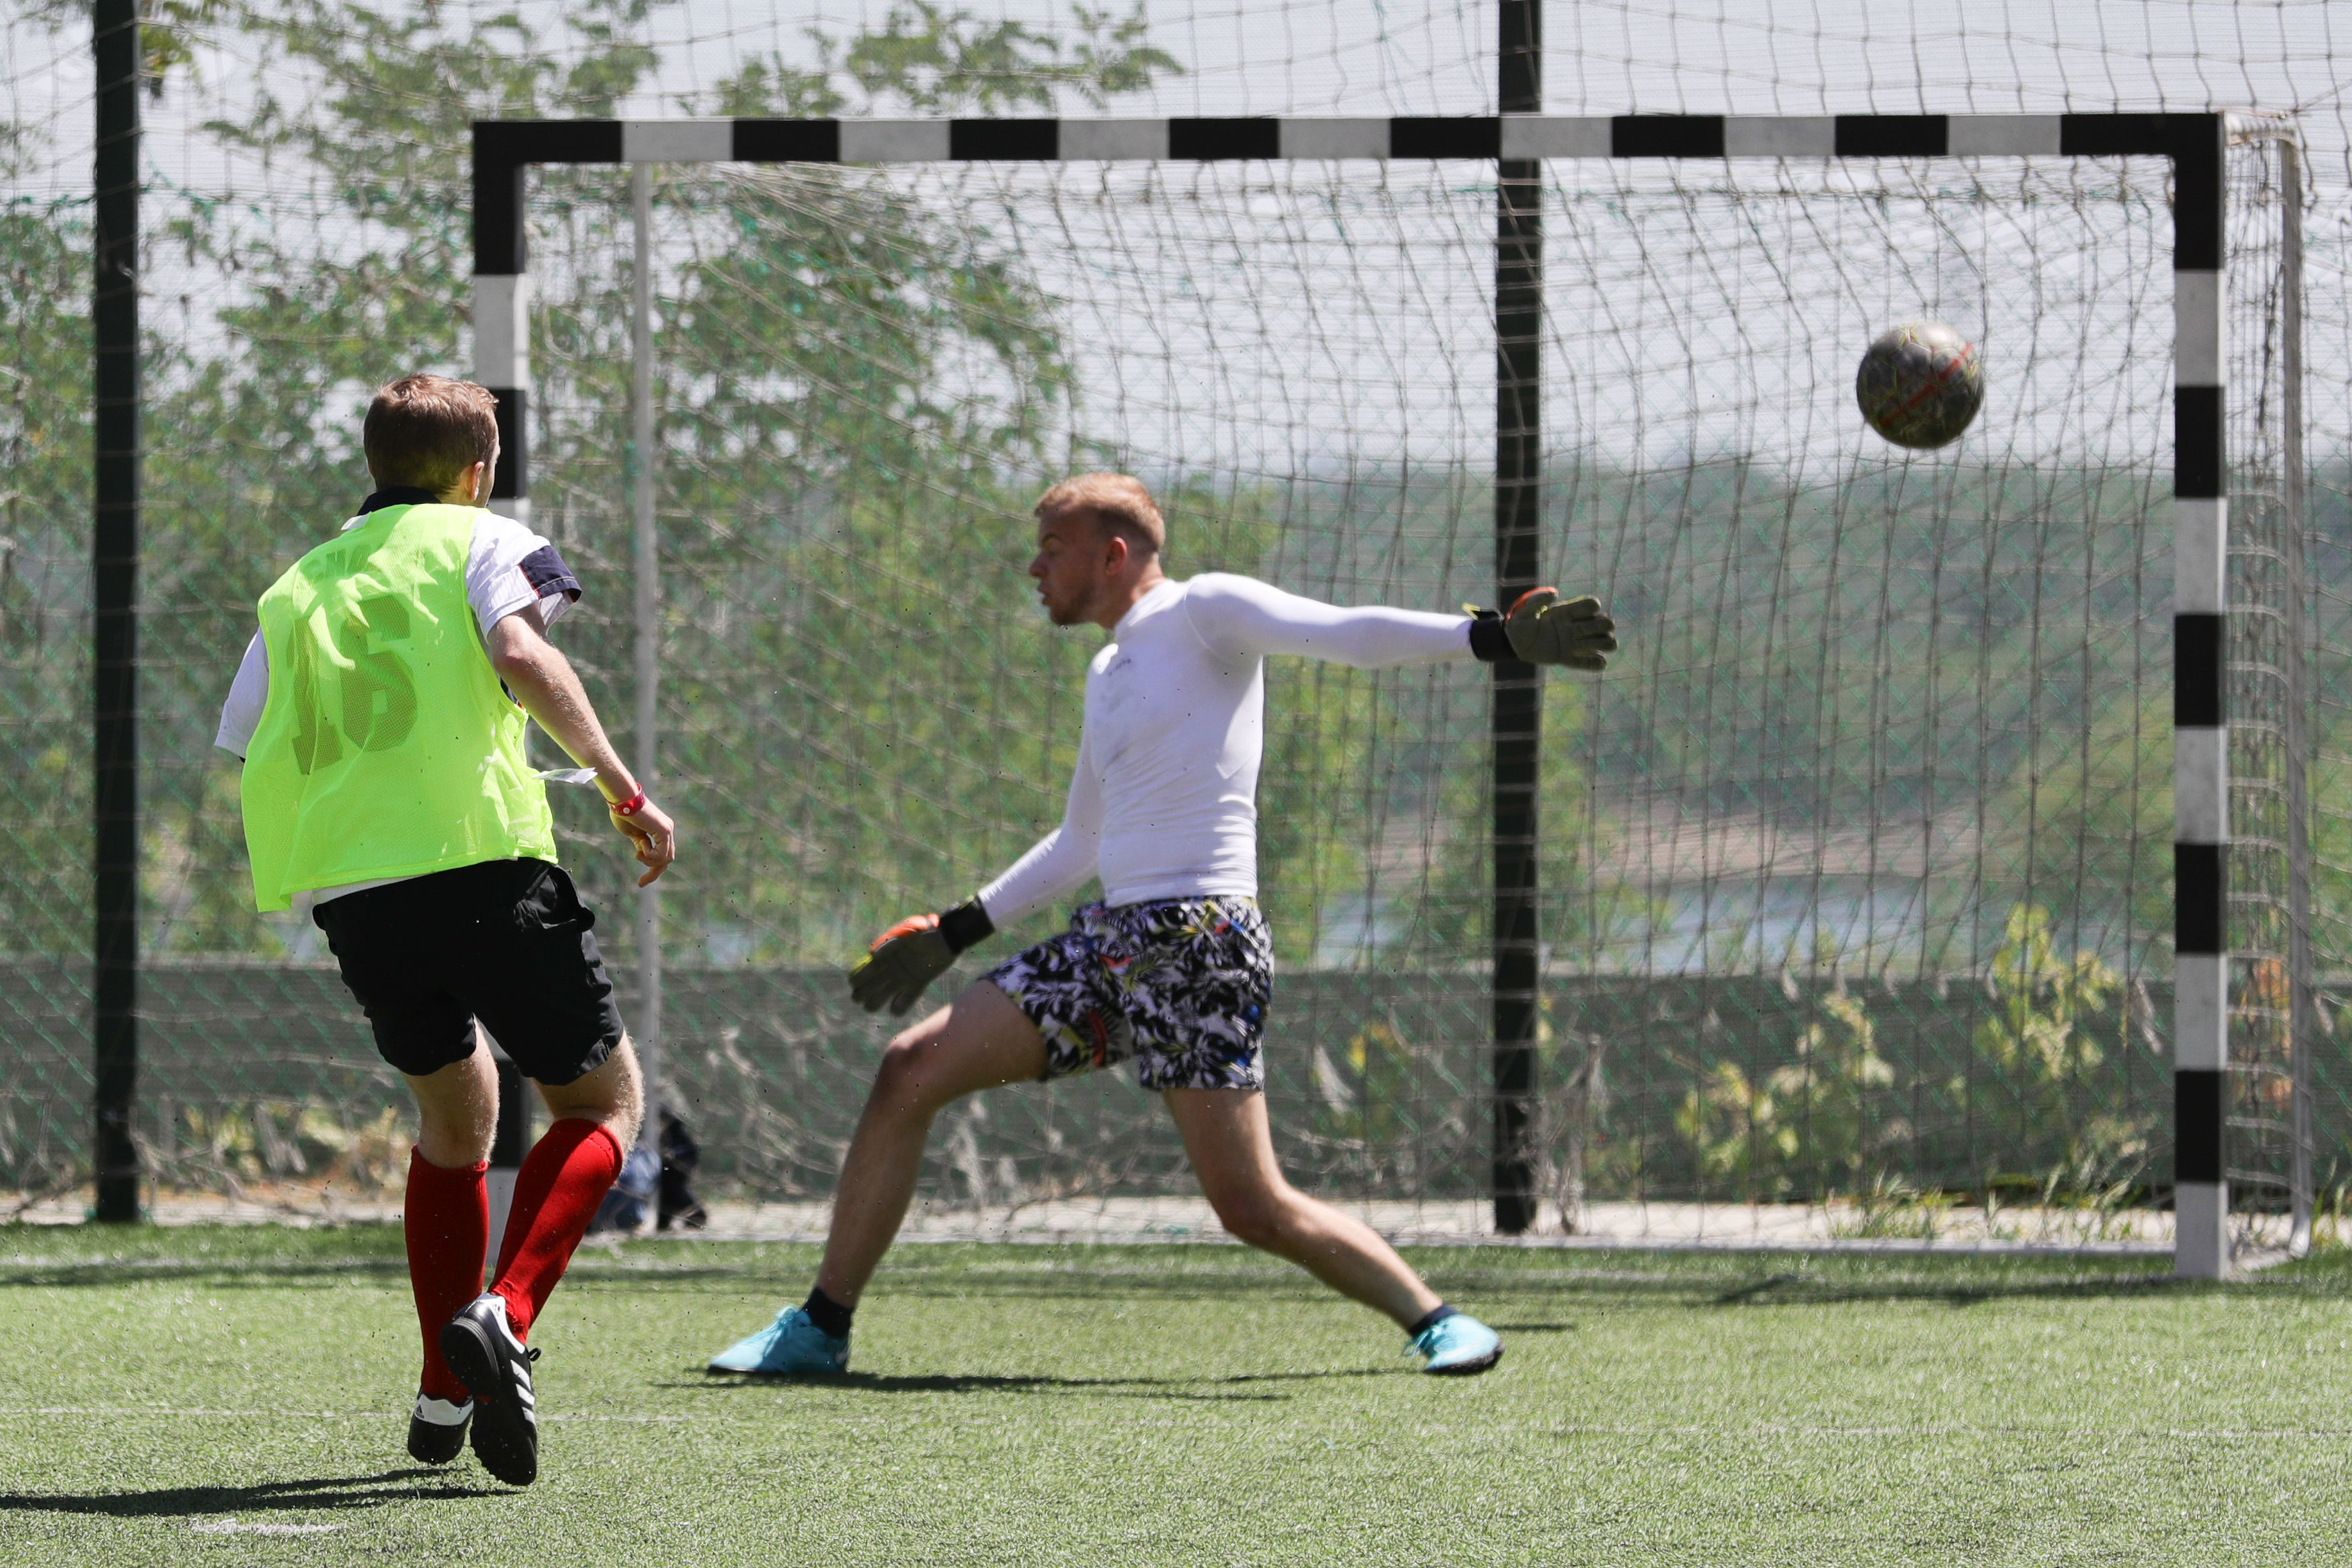 English football fans play against FC Rota Volgograd supporters in a five-a-side football match